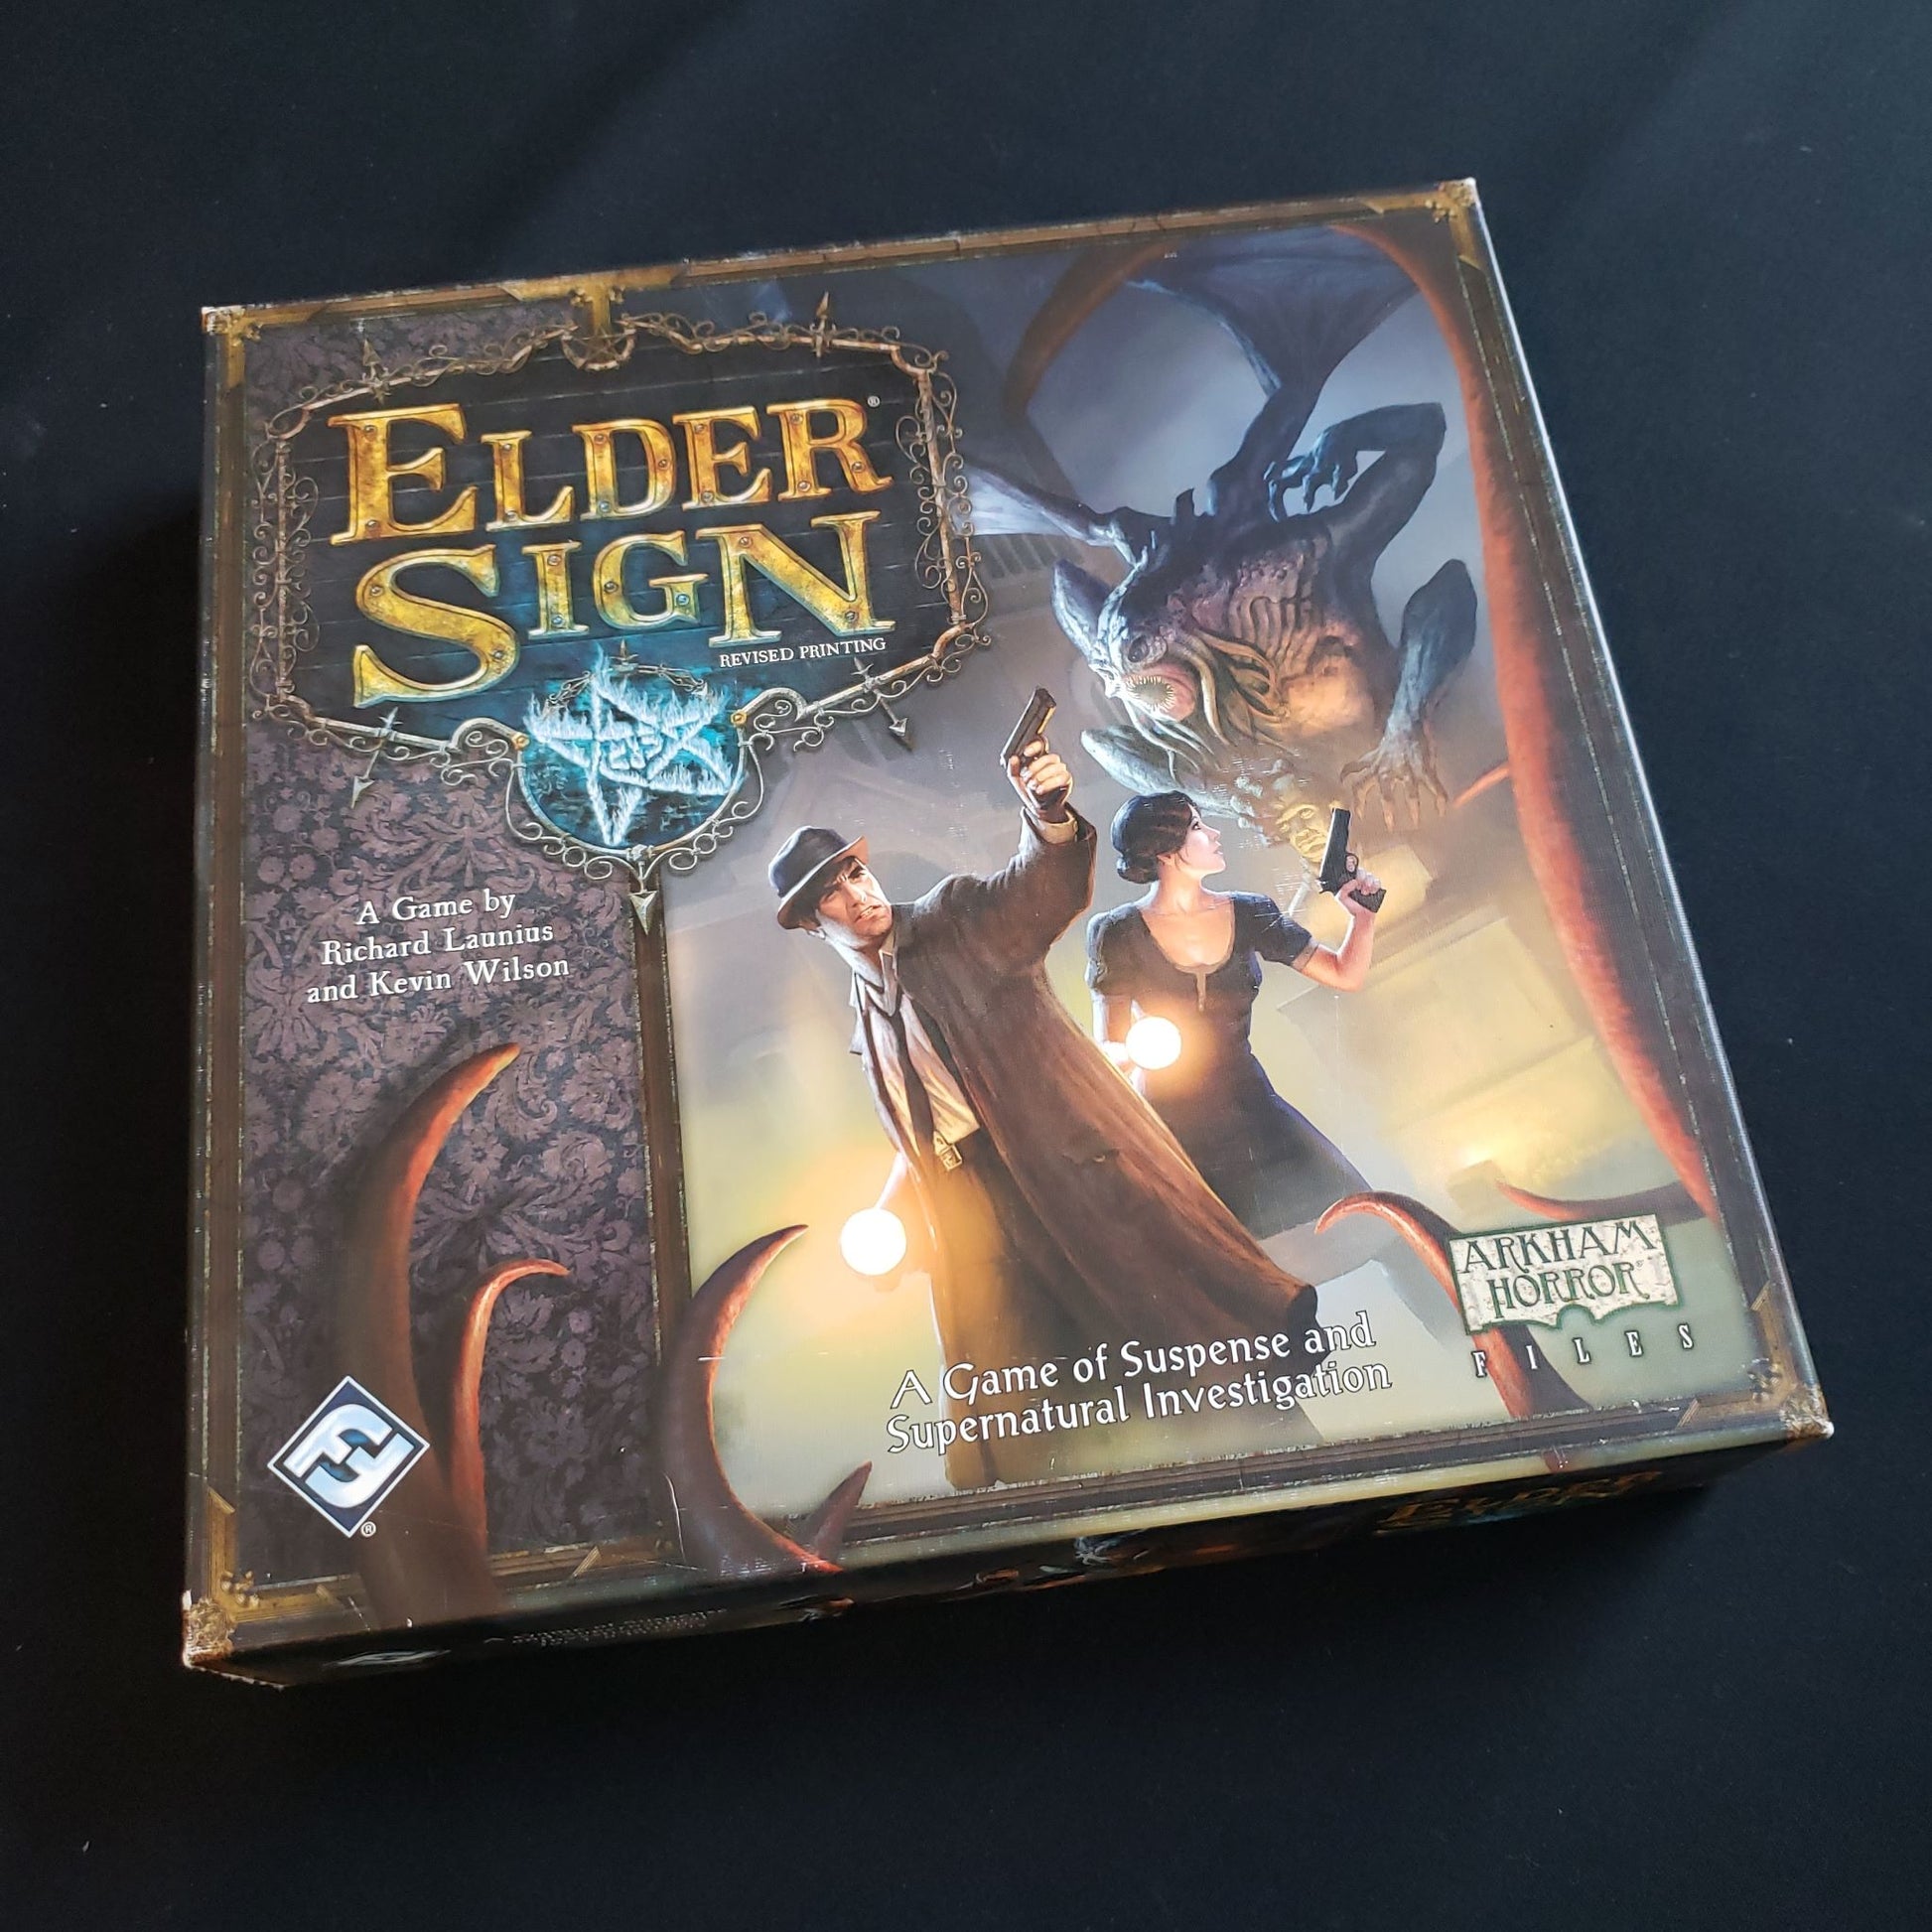 Elder Sign board game - front cover of box